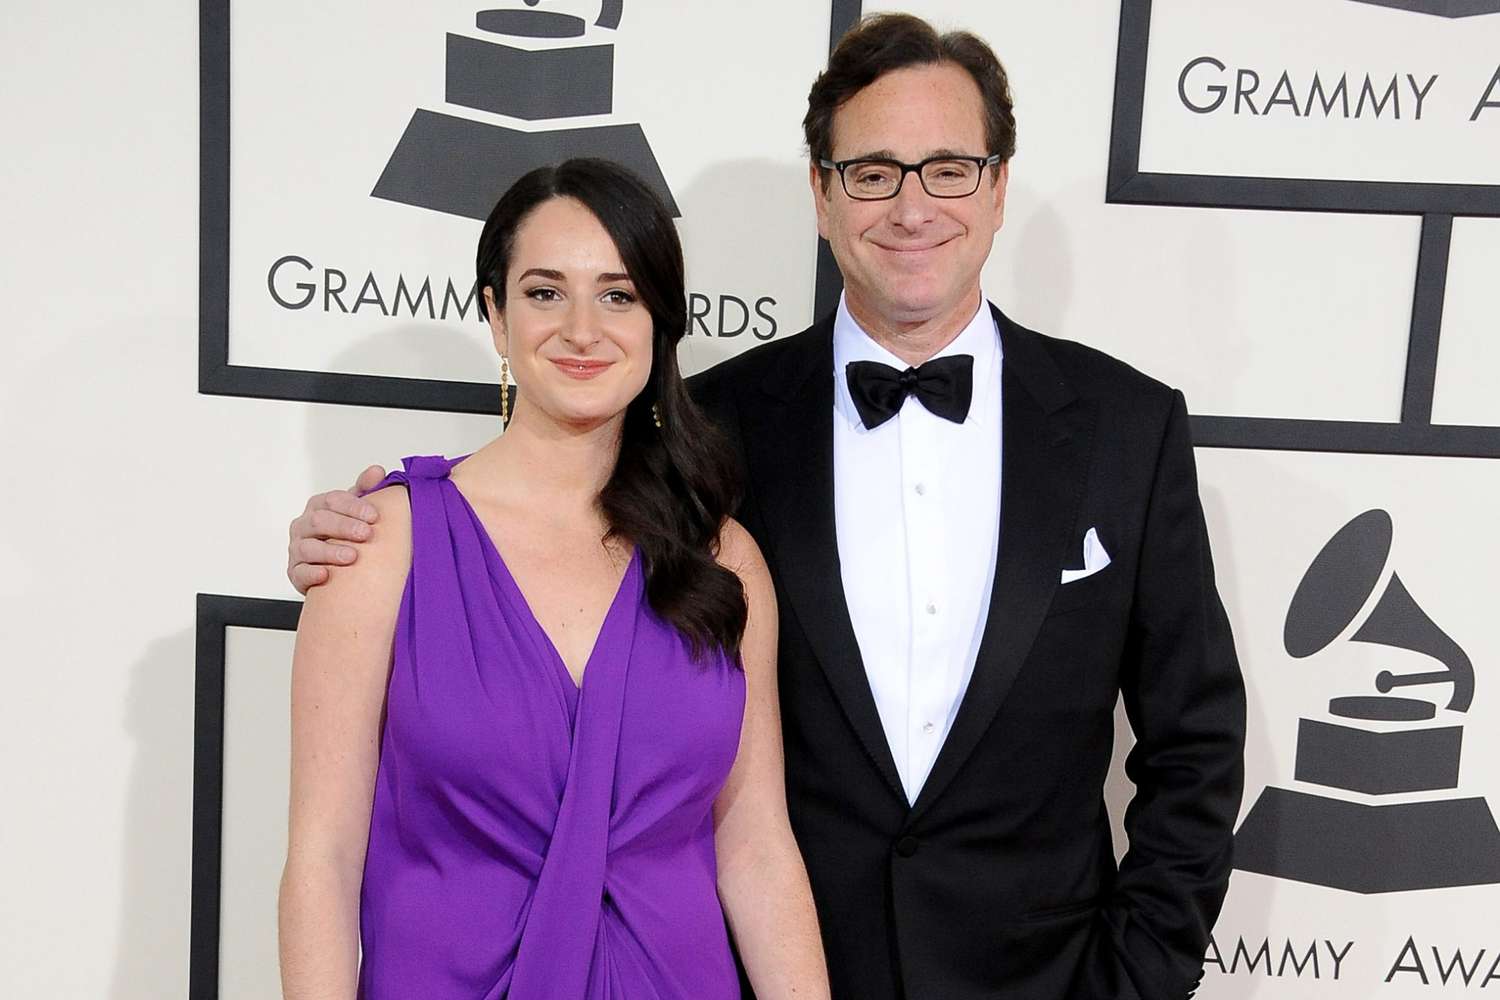 LOS ANGELES, CA - JANUARY 26: Comedian Bob Saget (R) and Lara Saget attend the 56th GRAMMY Awards at Staples Center on January 26, 2014 in Los Angeles, California. (Photo by Steve Granitz/WireImage)